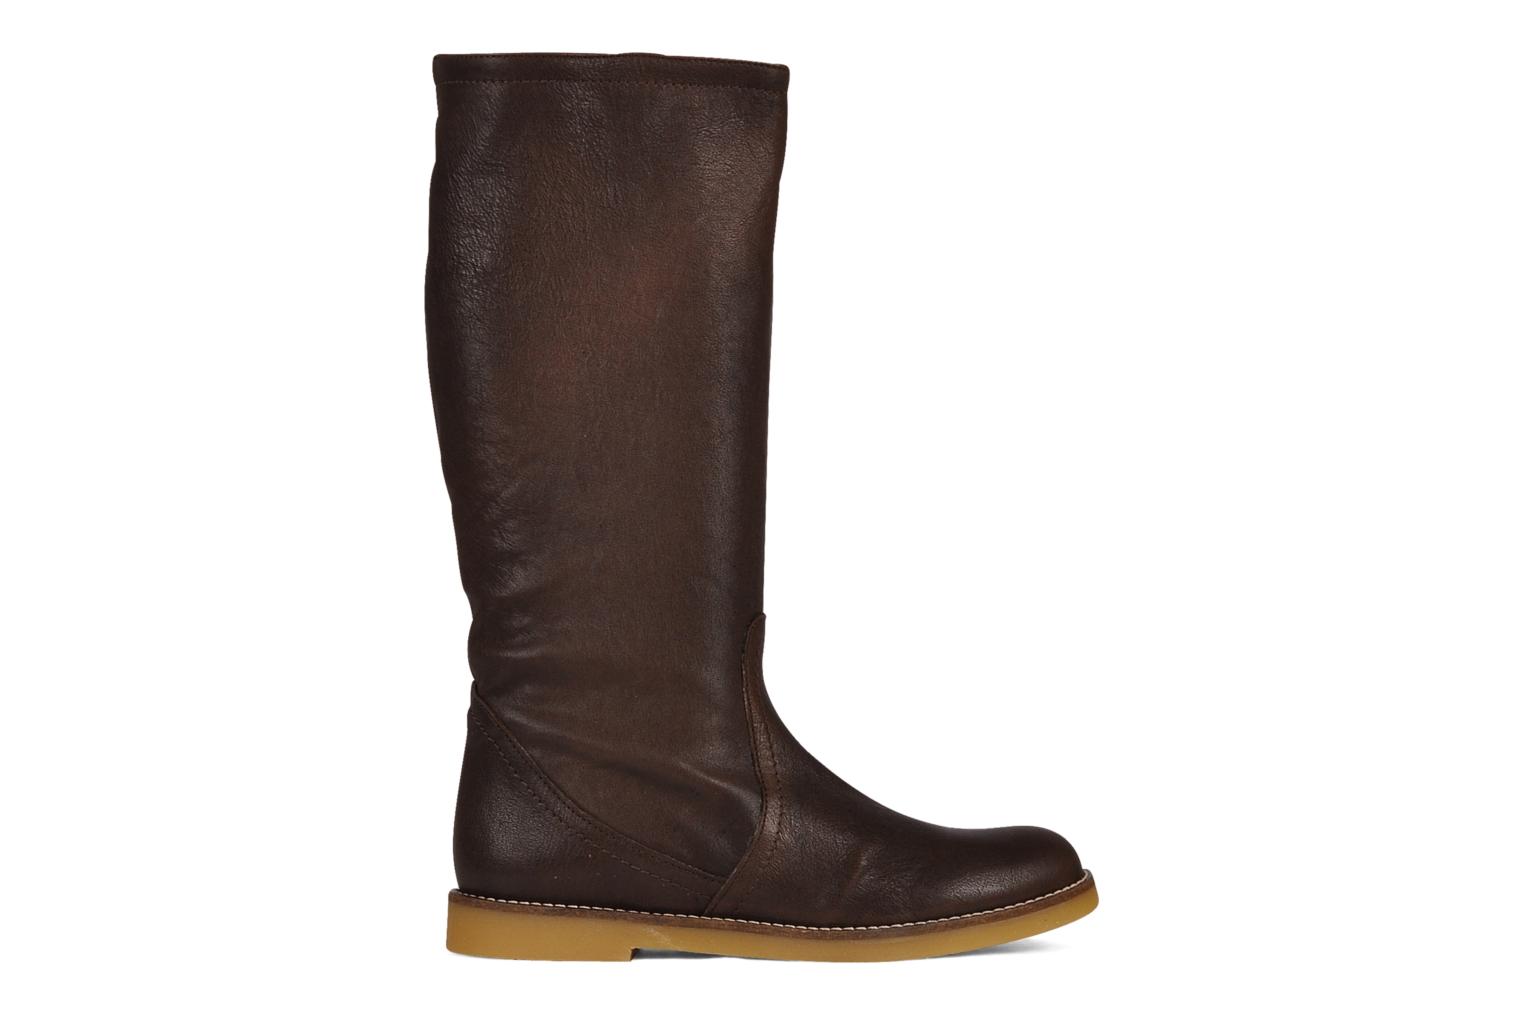 Jonak Botte Gomme Boots & wellies in Brown at Sarenza.co.uk (61210)